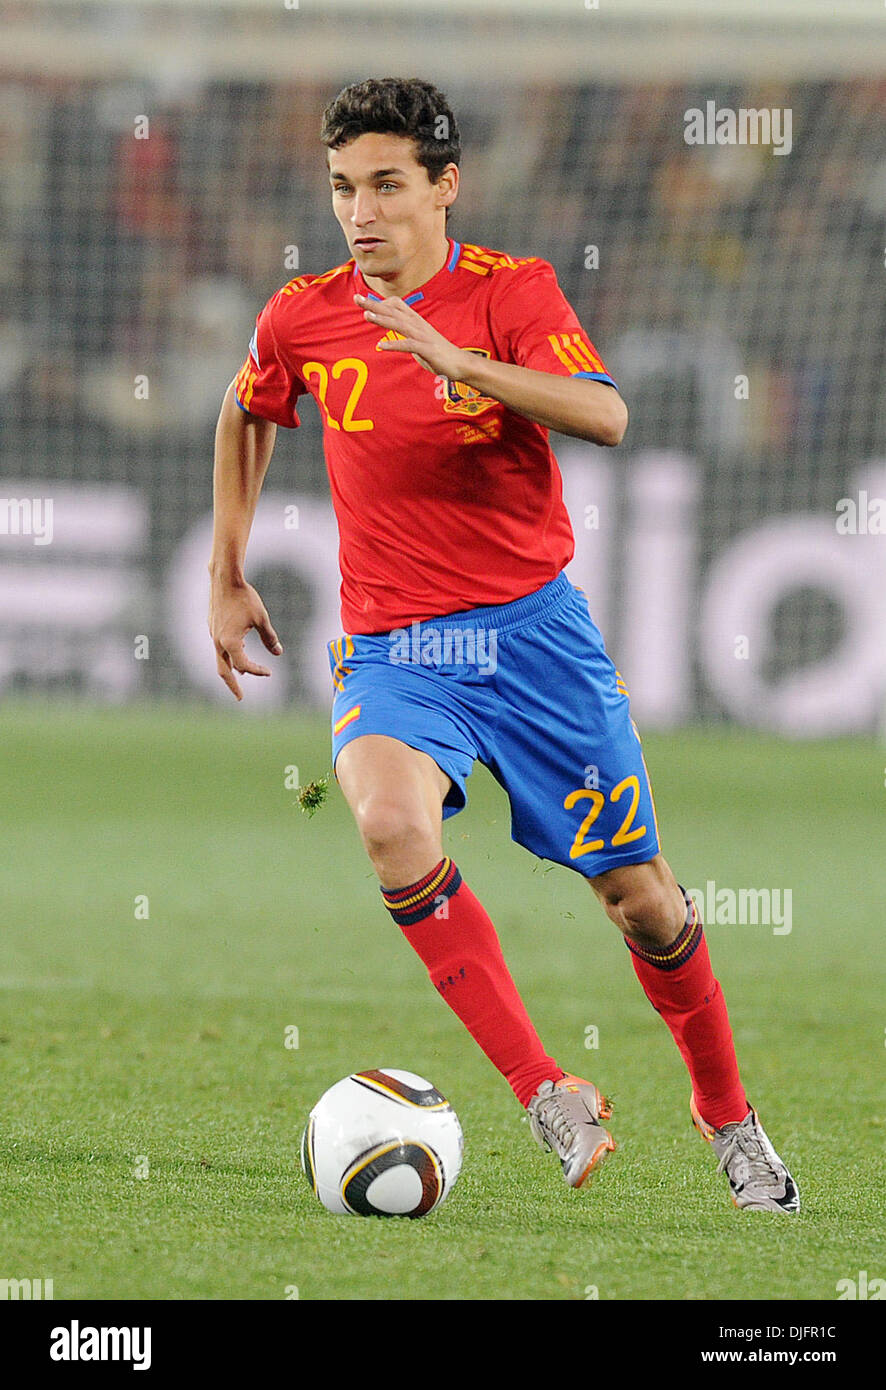 June 21, 2010 - Johannesburg, South Africa - Jesus Navas of Spain in action during the 2010 FIFA World Cup soccer match between Spain and Honduras at Ellis Park Stadium on June 21, 2010 in Johannesburg, South Africa. (Credit Image: © Luca Ghidoni/ZUMApress.com) Stock Photo